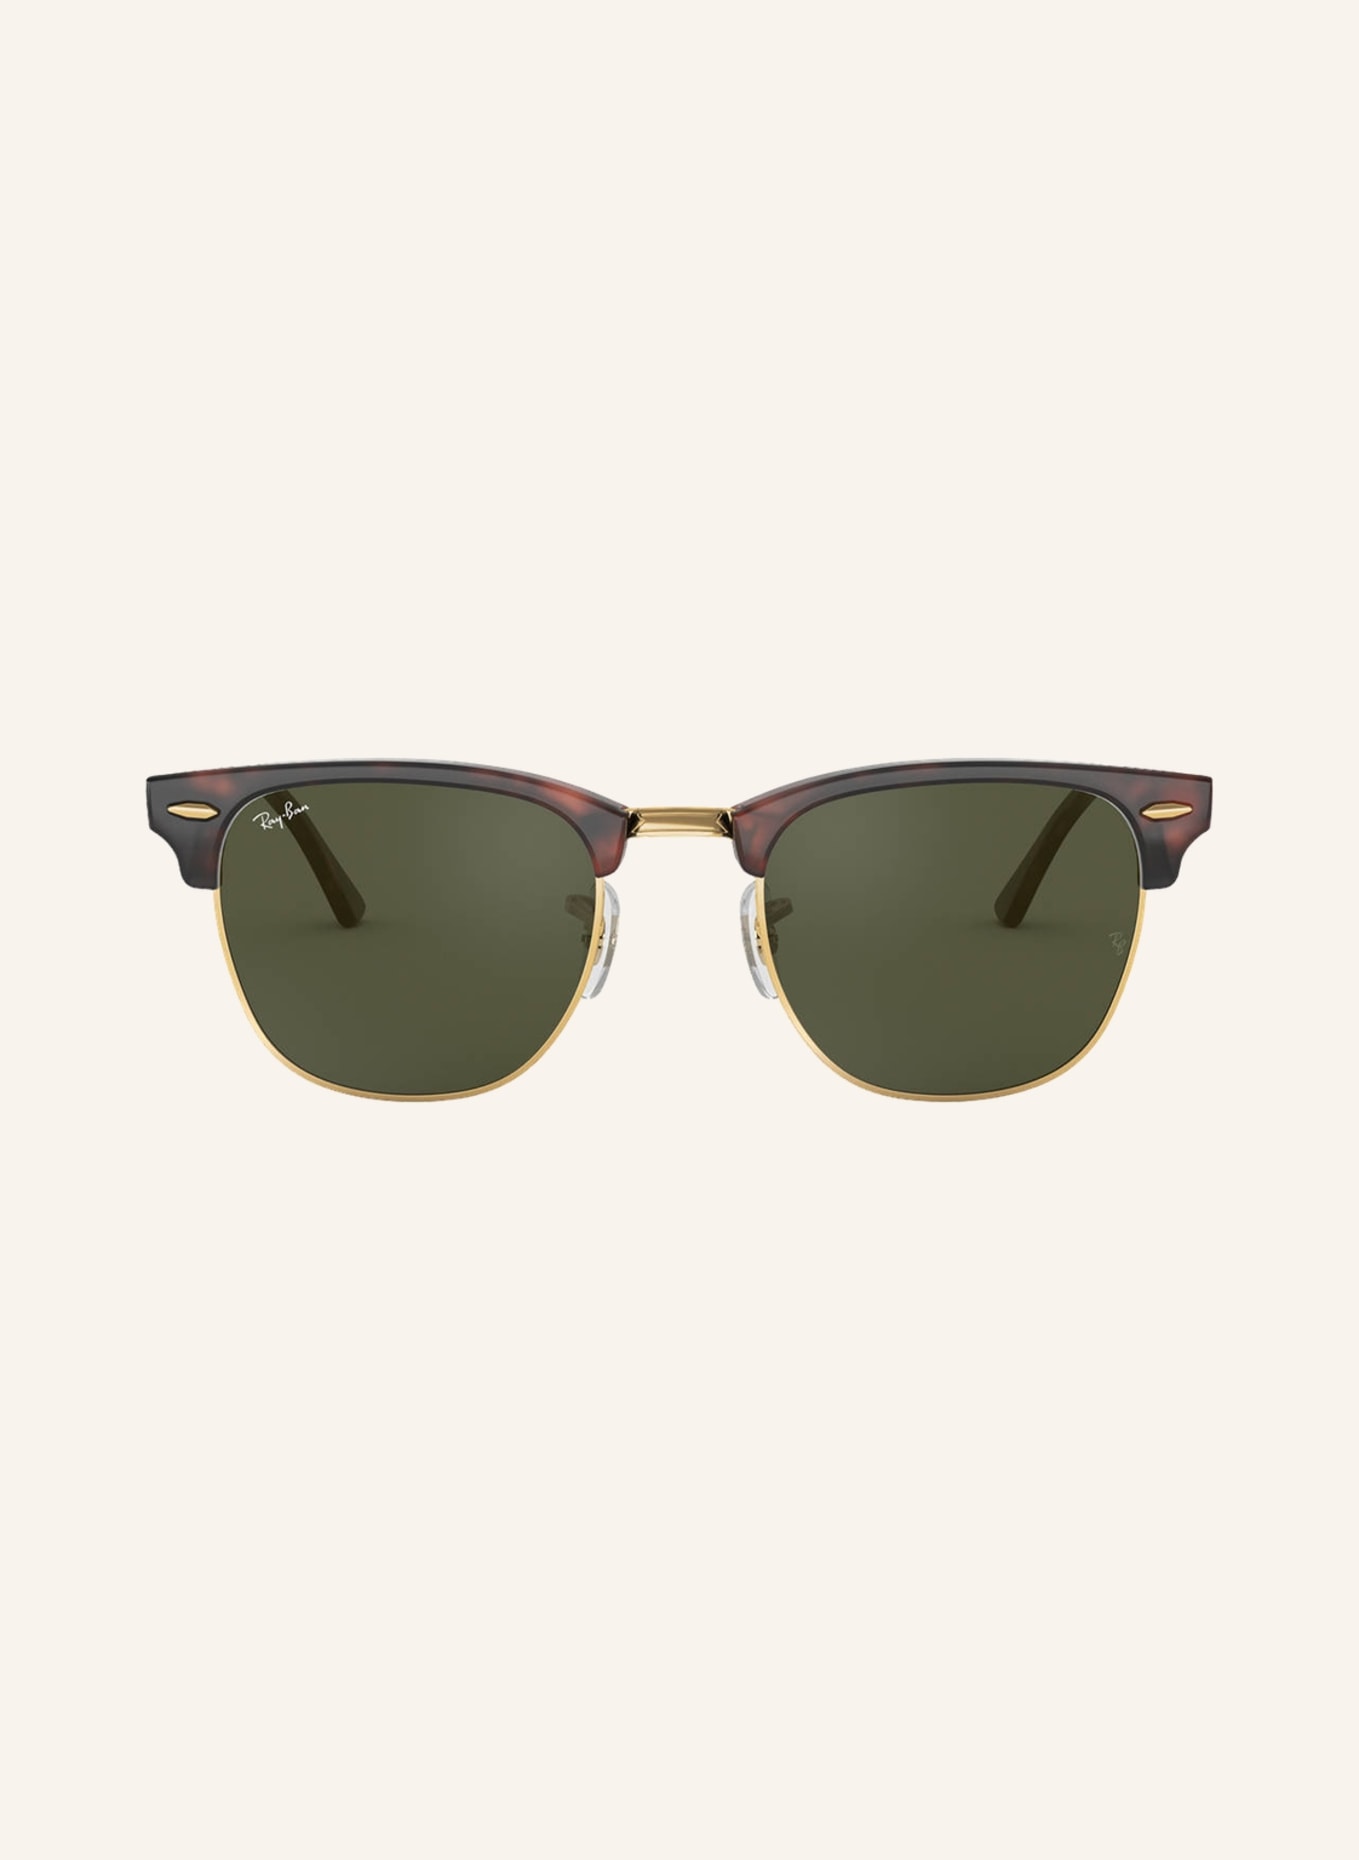 Ray-Ban Sunglasses RB3016 CLUBMASTER, Color: W0366 - HAVANA/GOLD/DARK GREEN (Image 2)